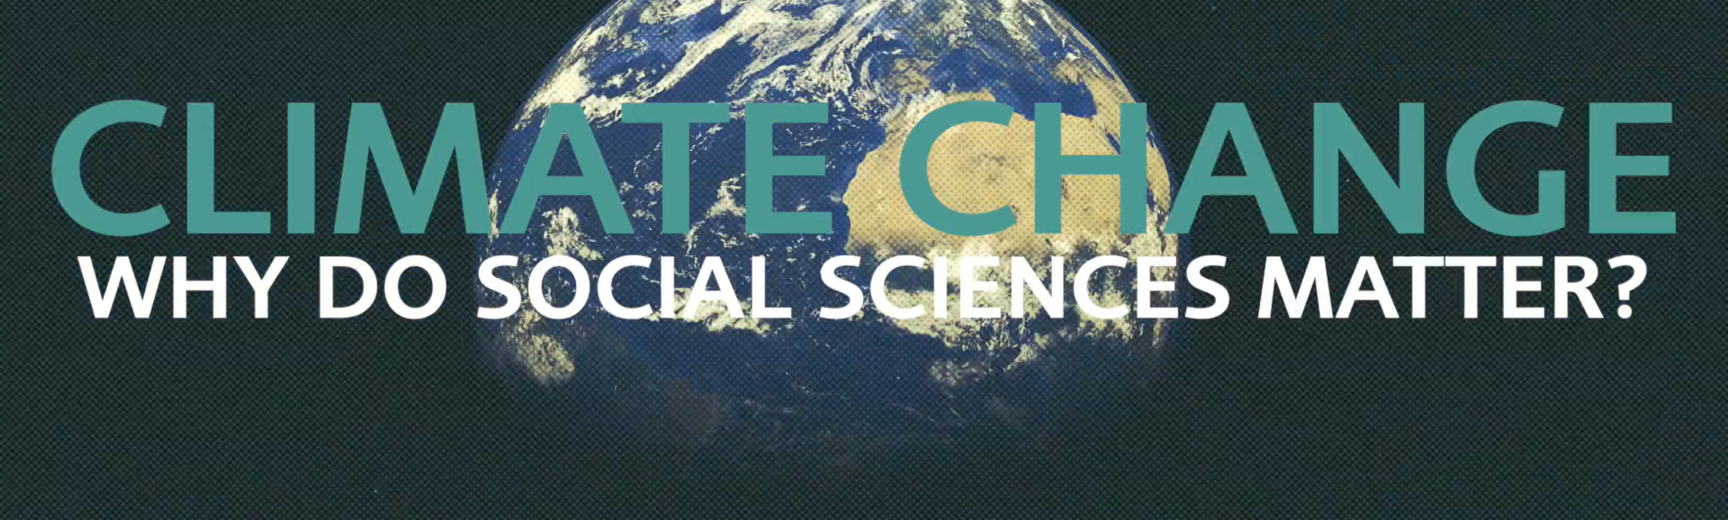 A view of the earth from space, superimposed with the title "climate change: why do social sciences matter?"